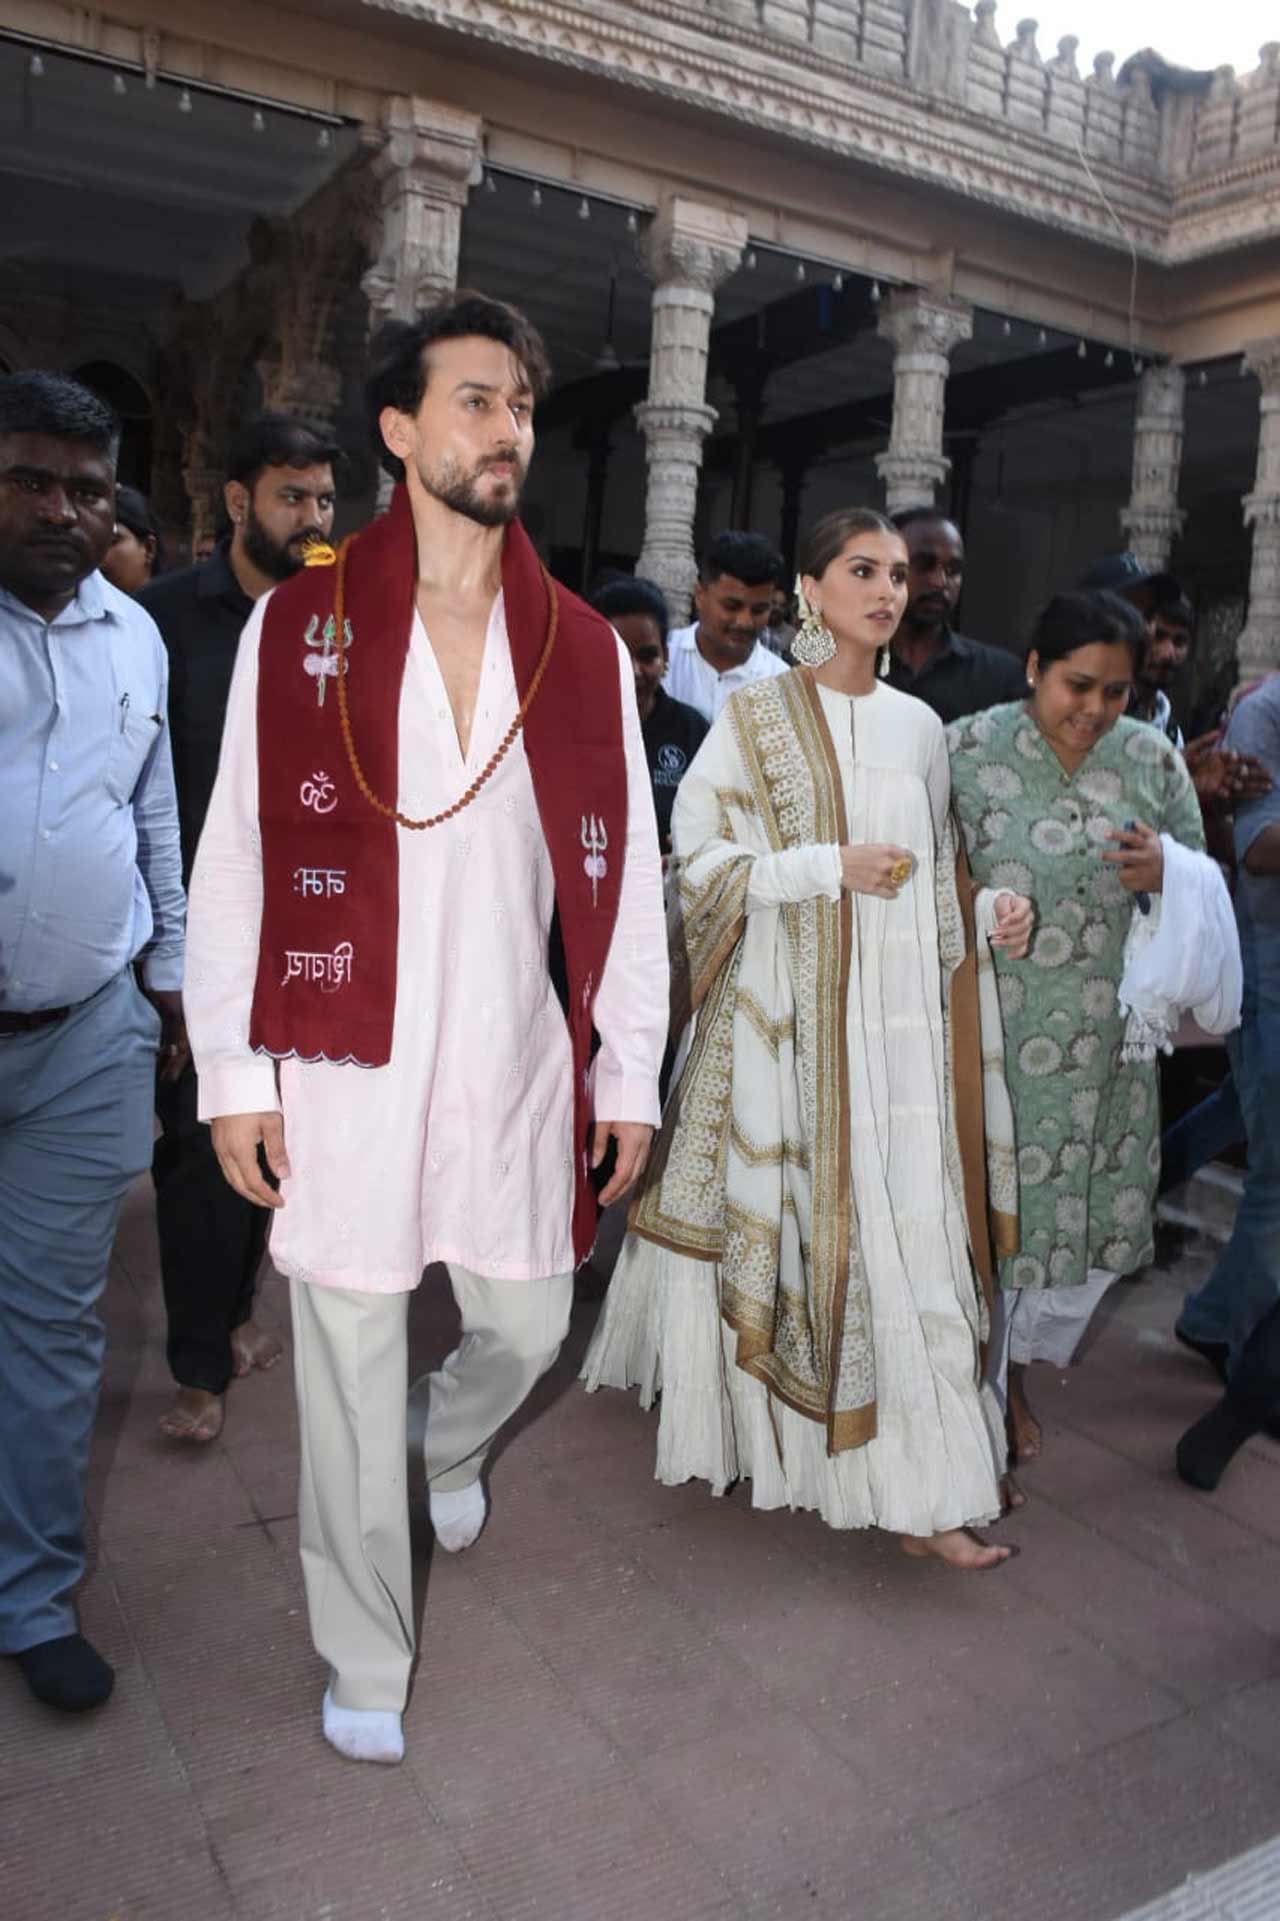 Tara Sutaria was seen wearing an ivory white Anarkali outfit for the outing.